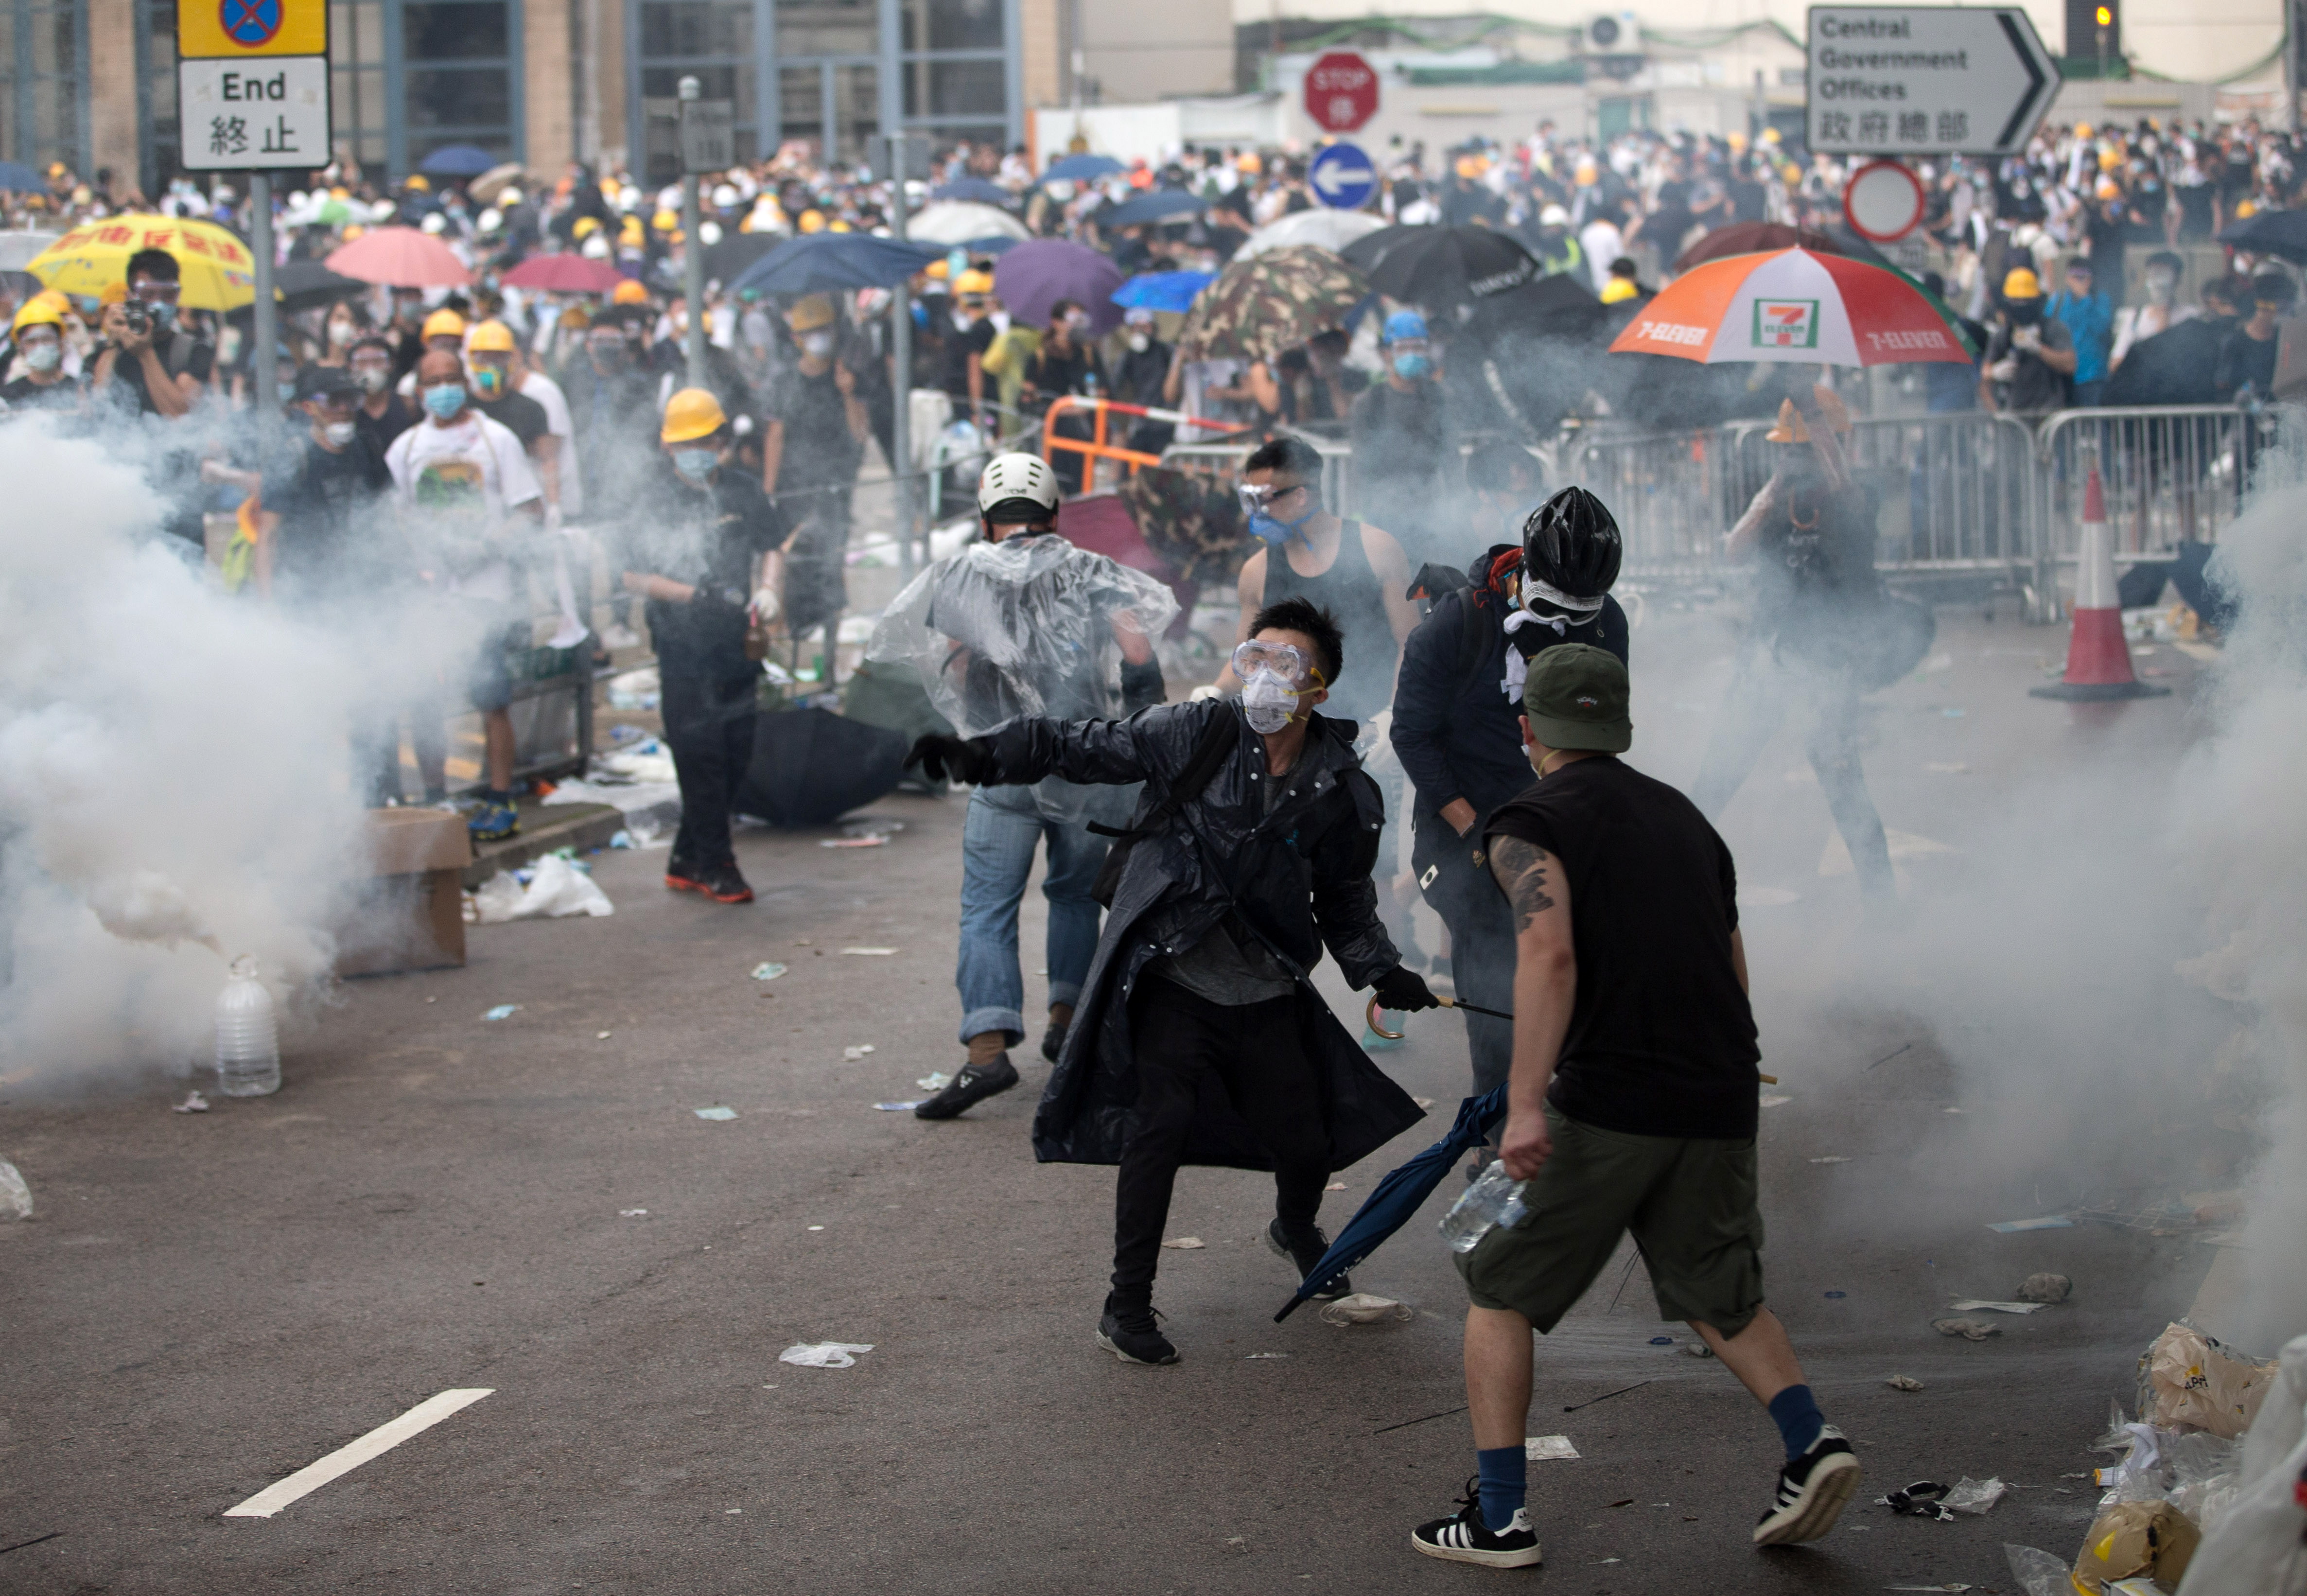 epa07643084 Protesters prepare to throw back tear gas at police during a rally against an extradition bill outside the Legislative Council in Hong Kong, China, 12 June 2019. The bill has faced immense opposition from pan-democrats, the business sector, and the international community, would allow the transfer of fugitives to jurisdictions which Hong Kong does not have a treaty with, including mainland China. Critics of the bill have expressed concern over unfair trials and a lack of human rights protection in mainland China.  EPA/JEROME FAVRE